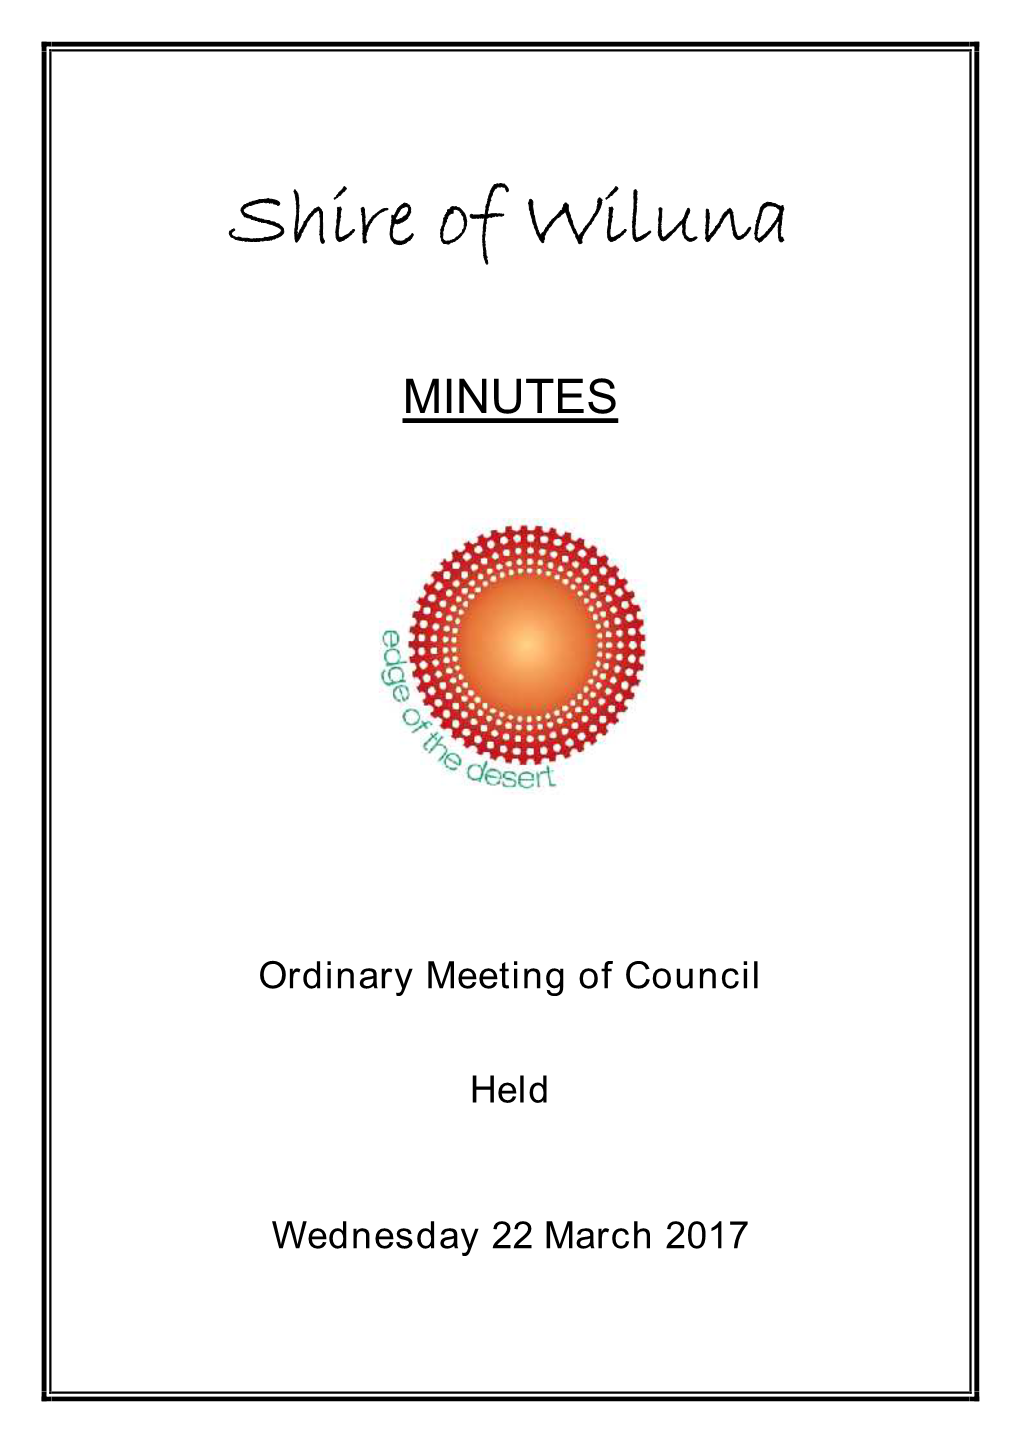 Ordinary Meeting of Council Held Wednesday 22 March 2017